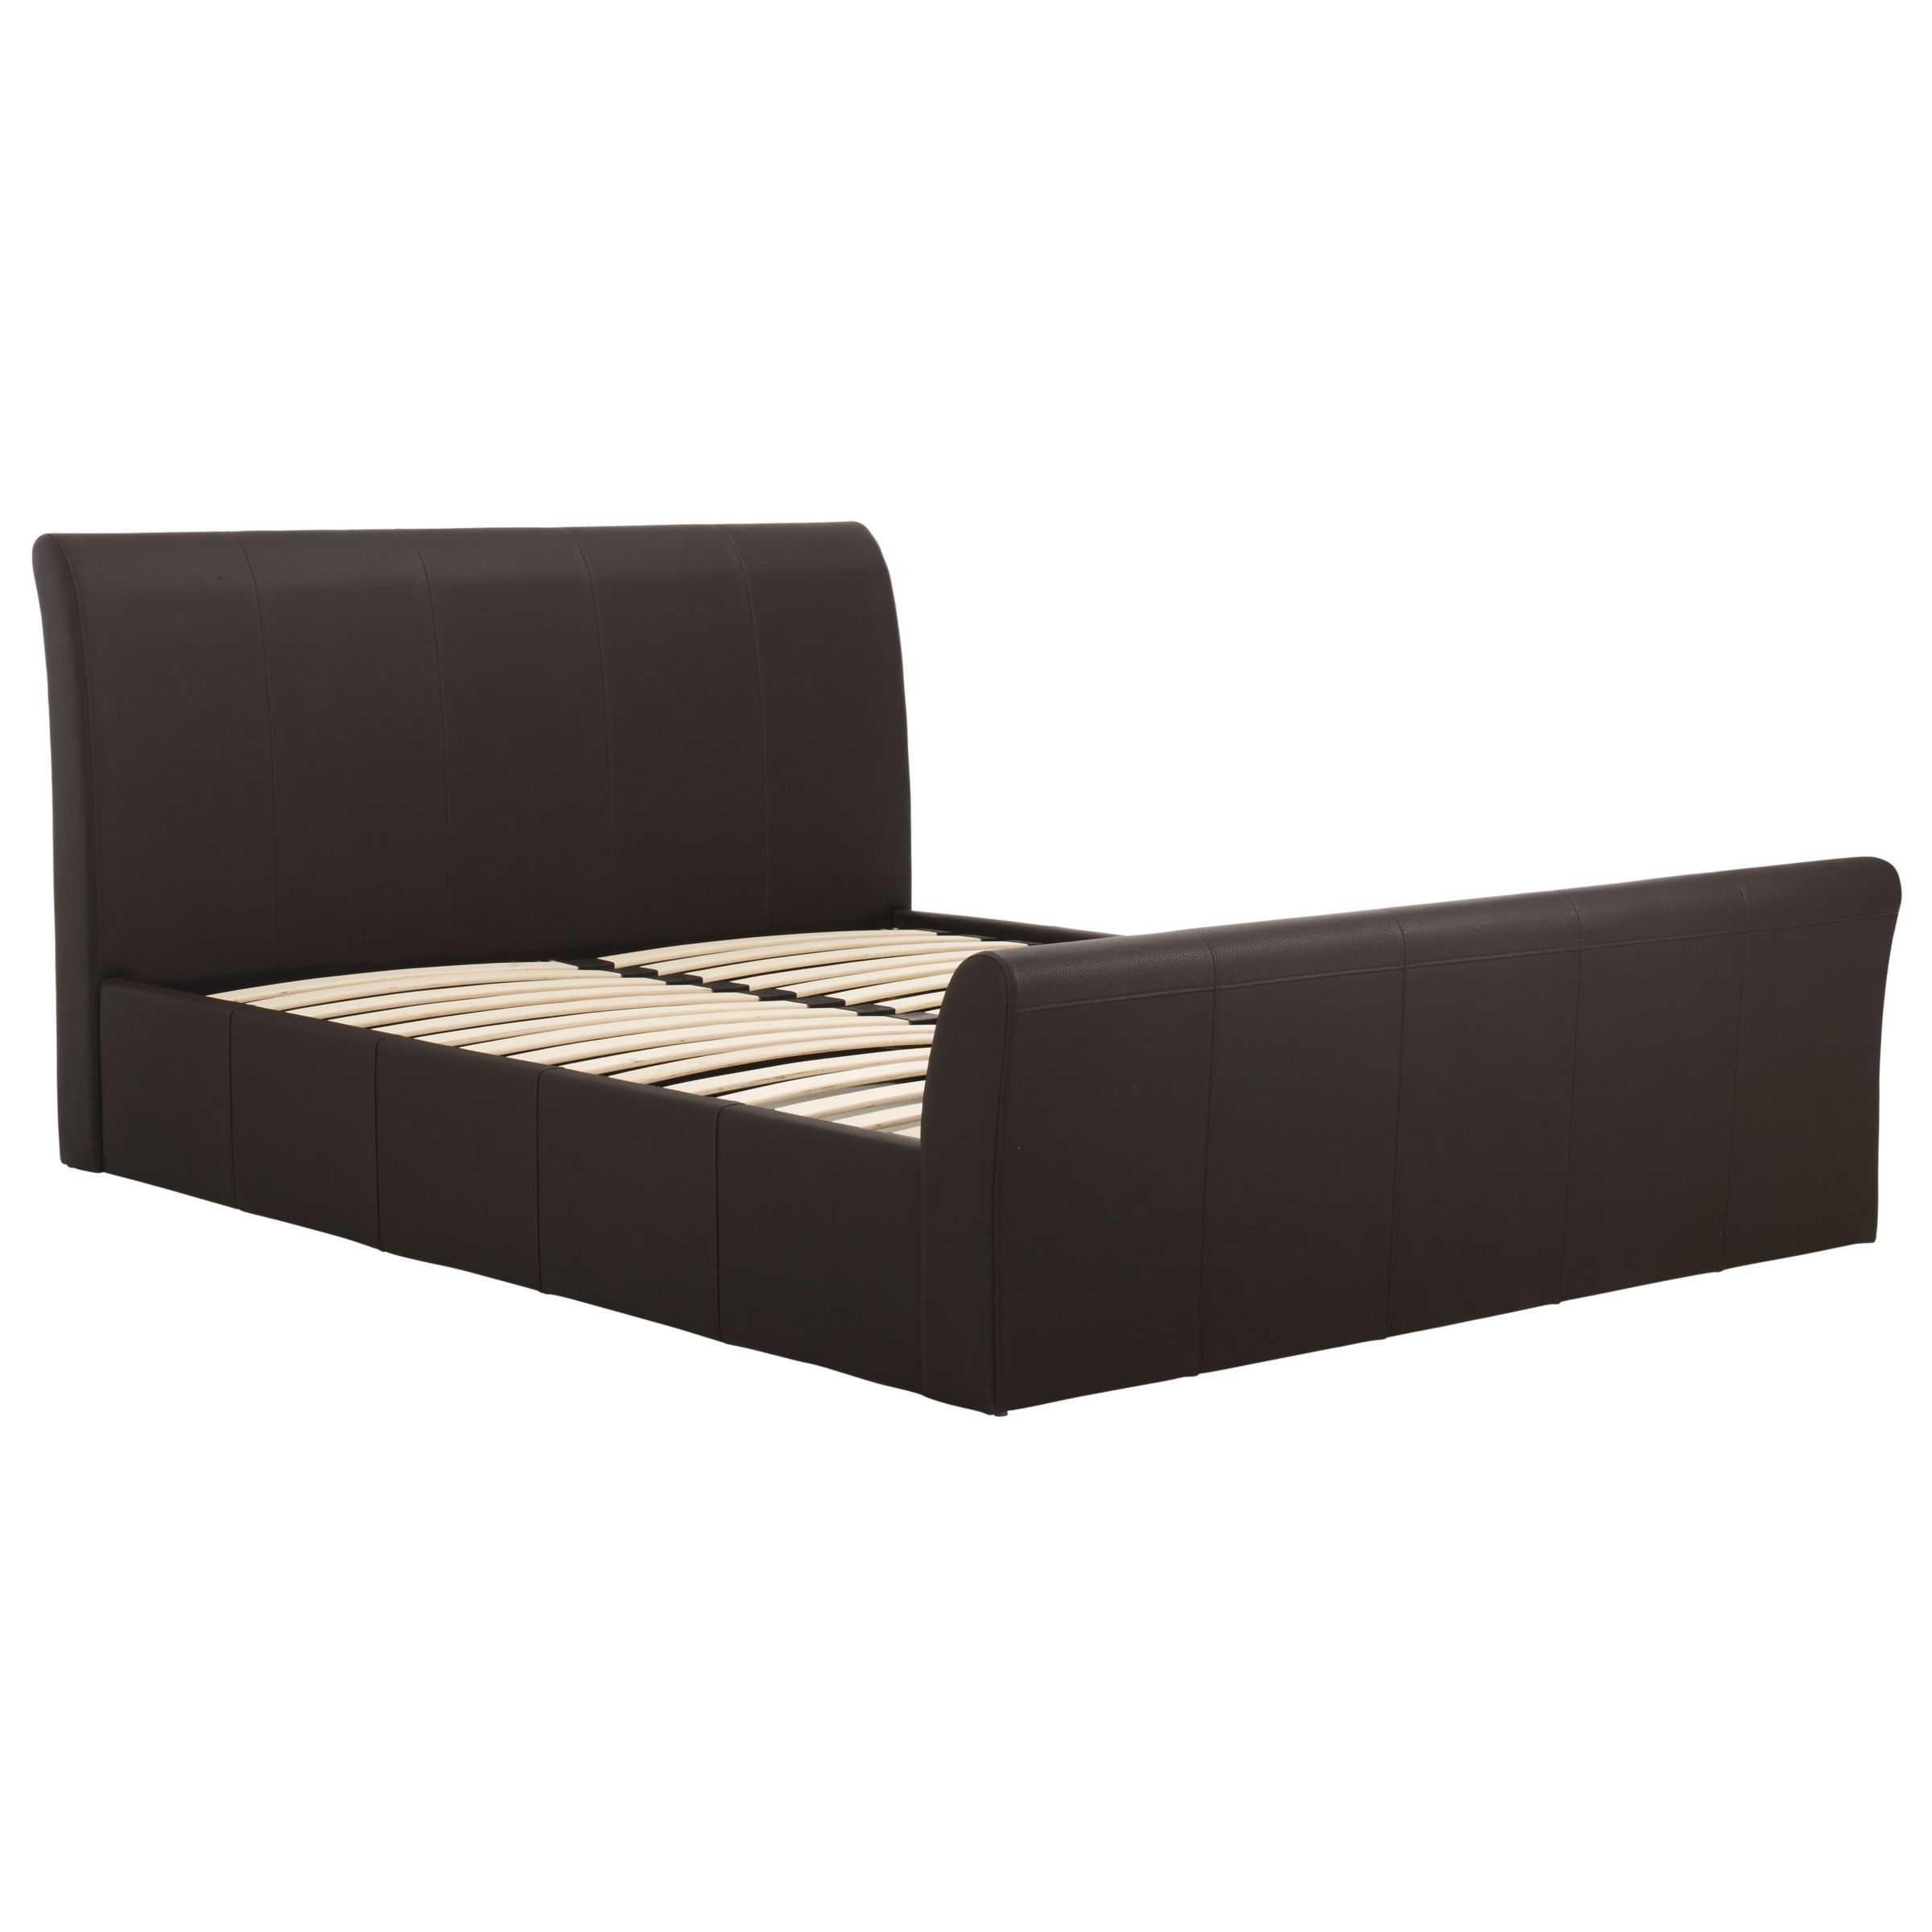 John Lewis Chatham Ottoman Bedstead, Chocolate, Double at John Lewis